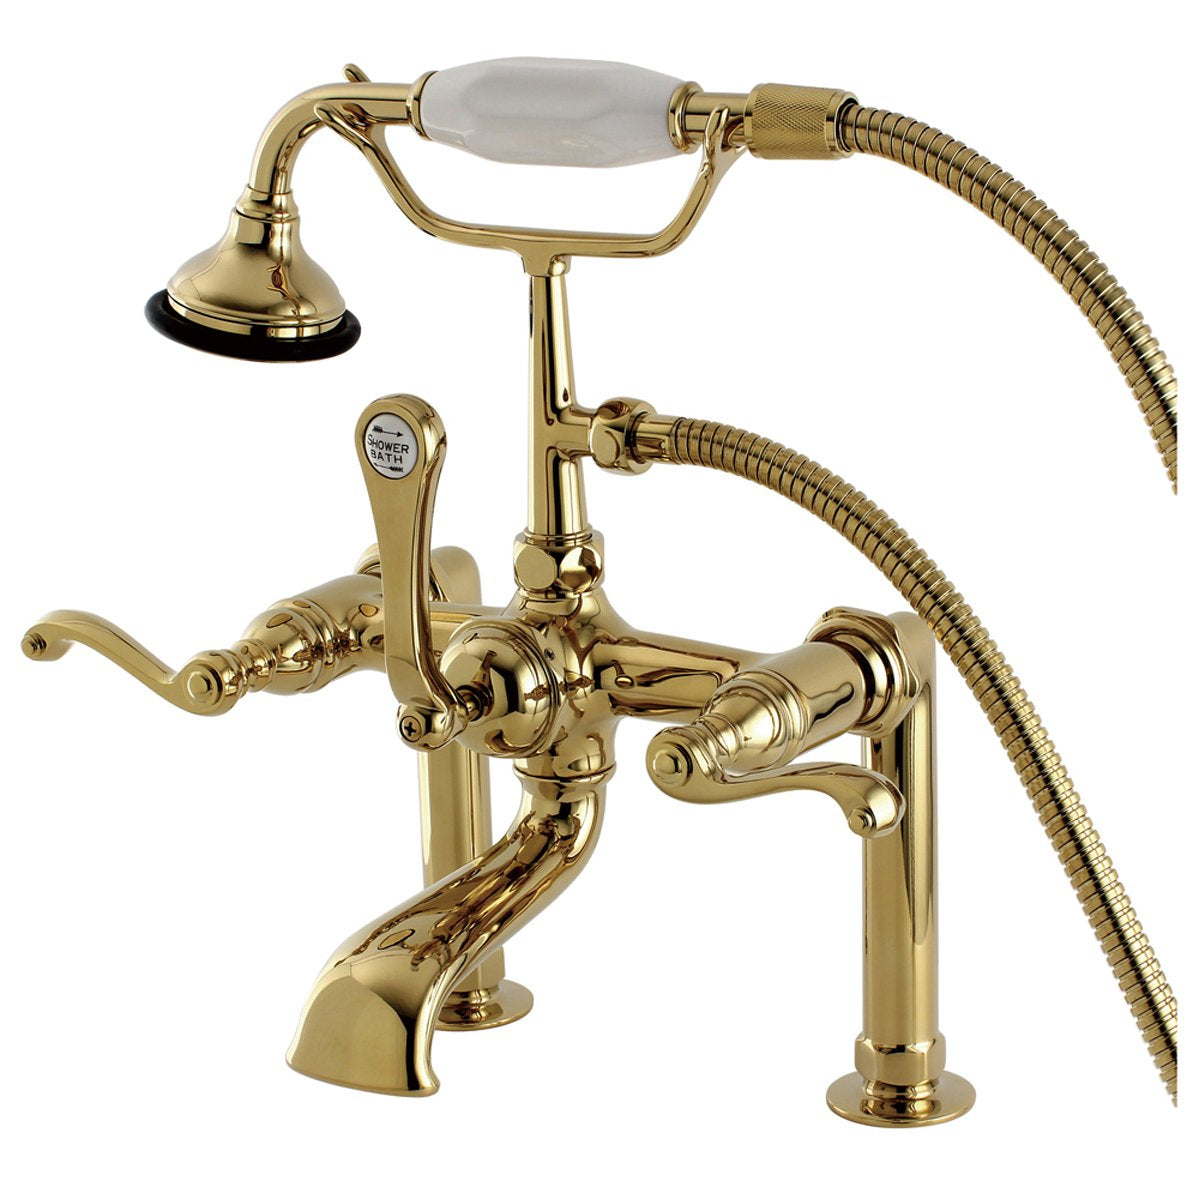 Kingston Brass Aqua Eden AE103T2FL Royale Deck Mount Clawfoot Tub Faucet in Polished Brass-Tub Faucets-Free Shipping-Directsinks.